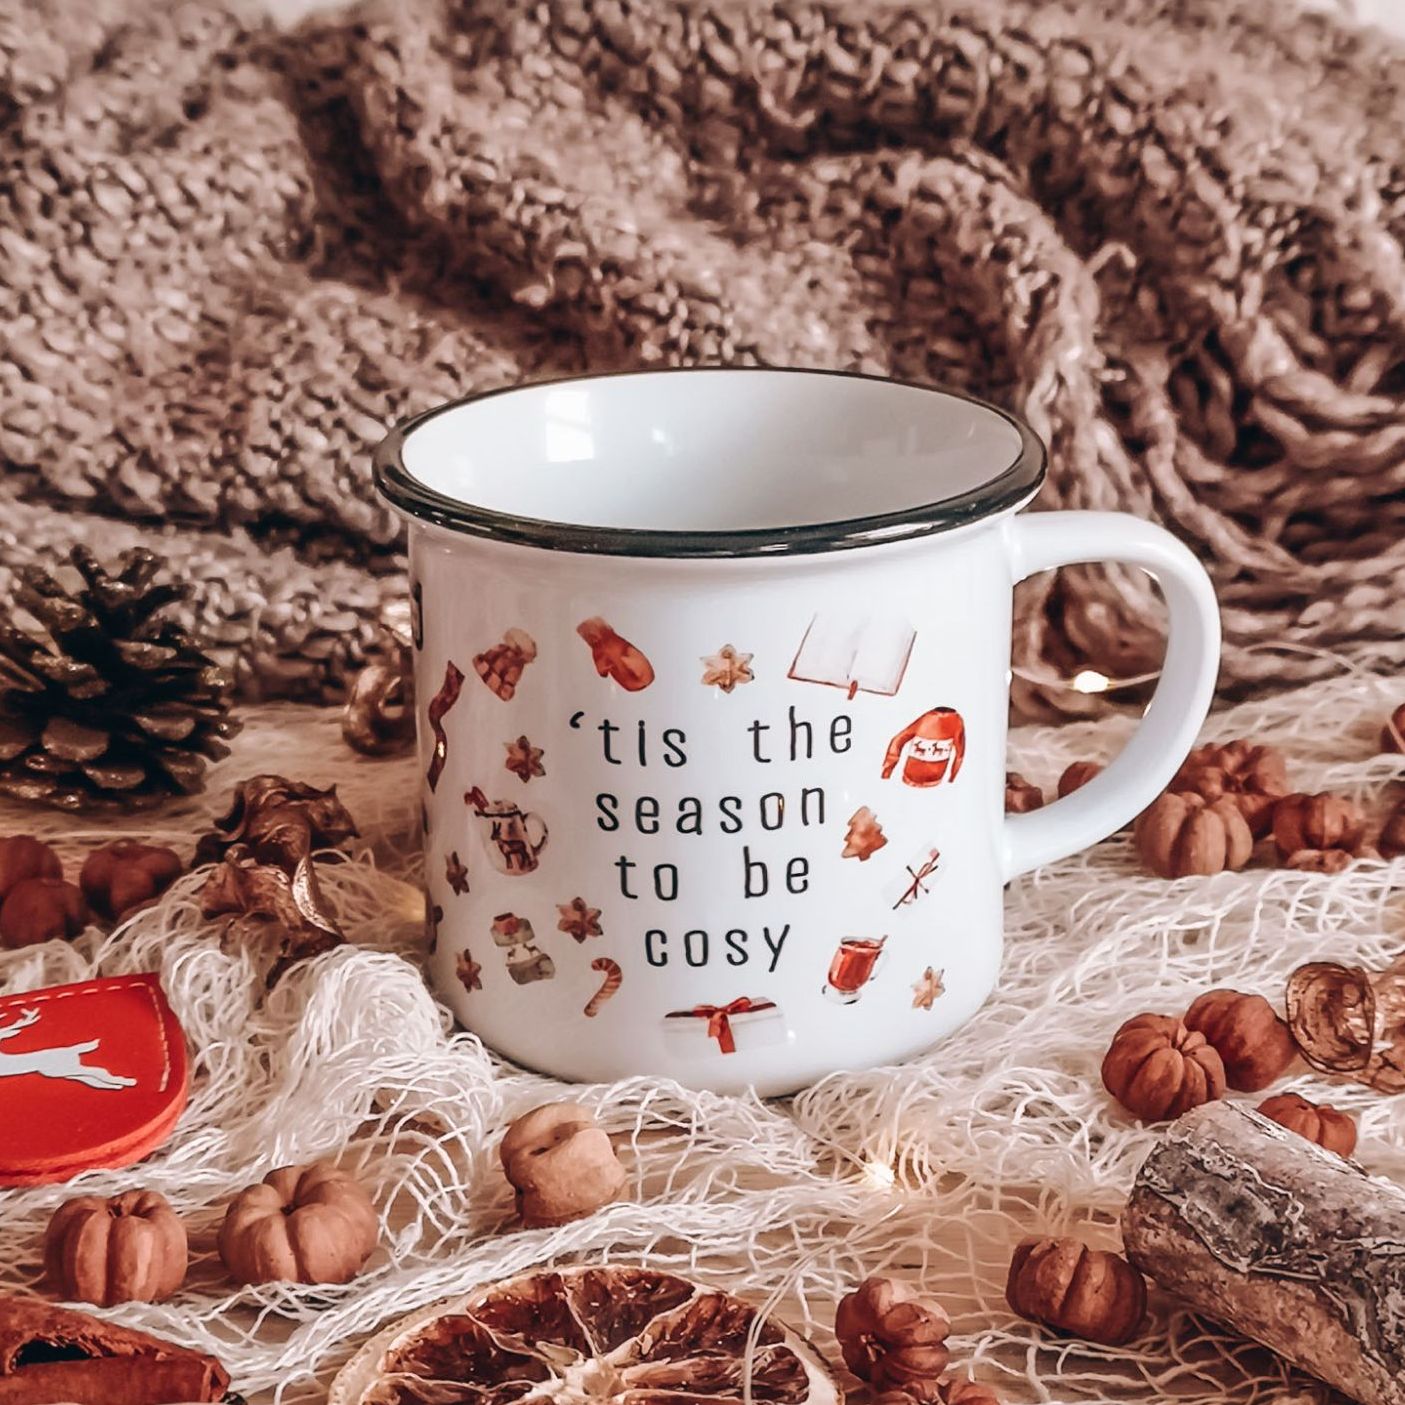                                                   New cosy and bookish designs                                                                                                                                                                   ALL NEW PRODUCTS